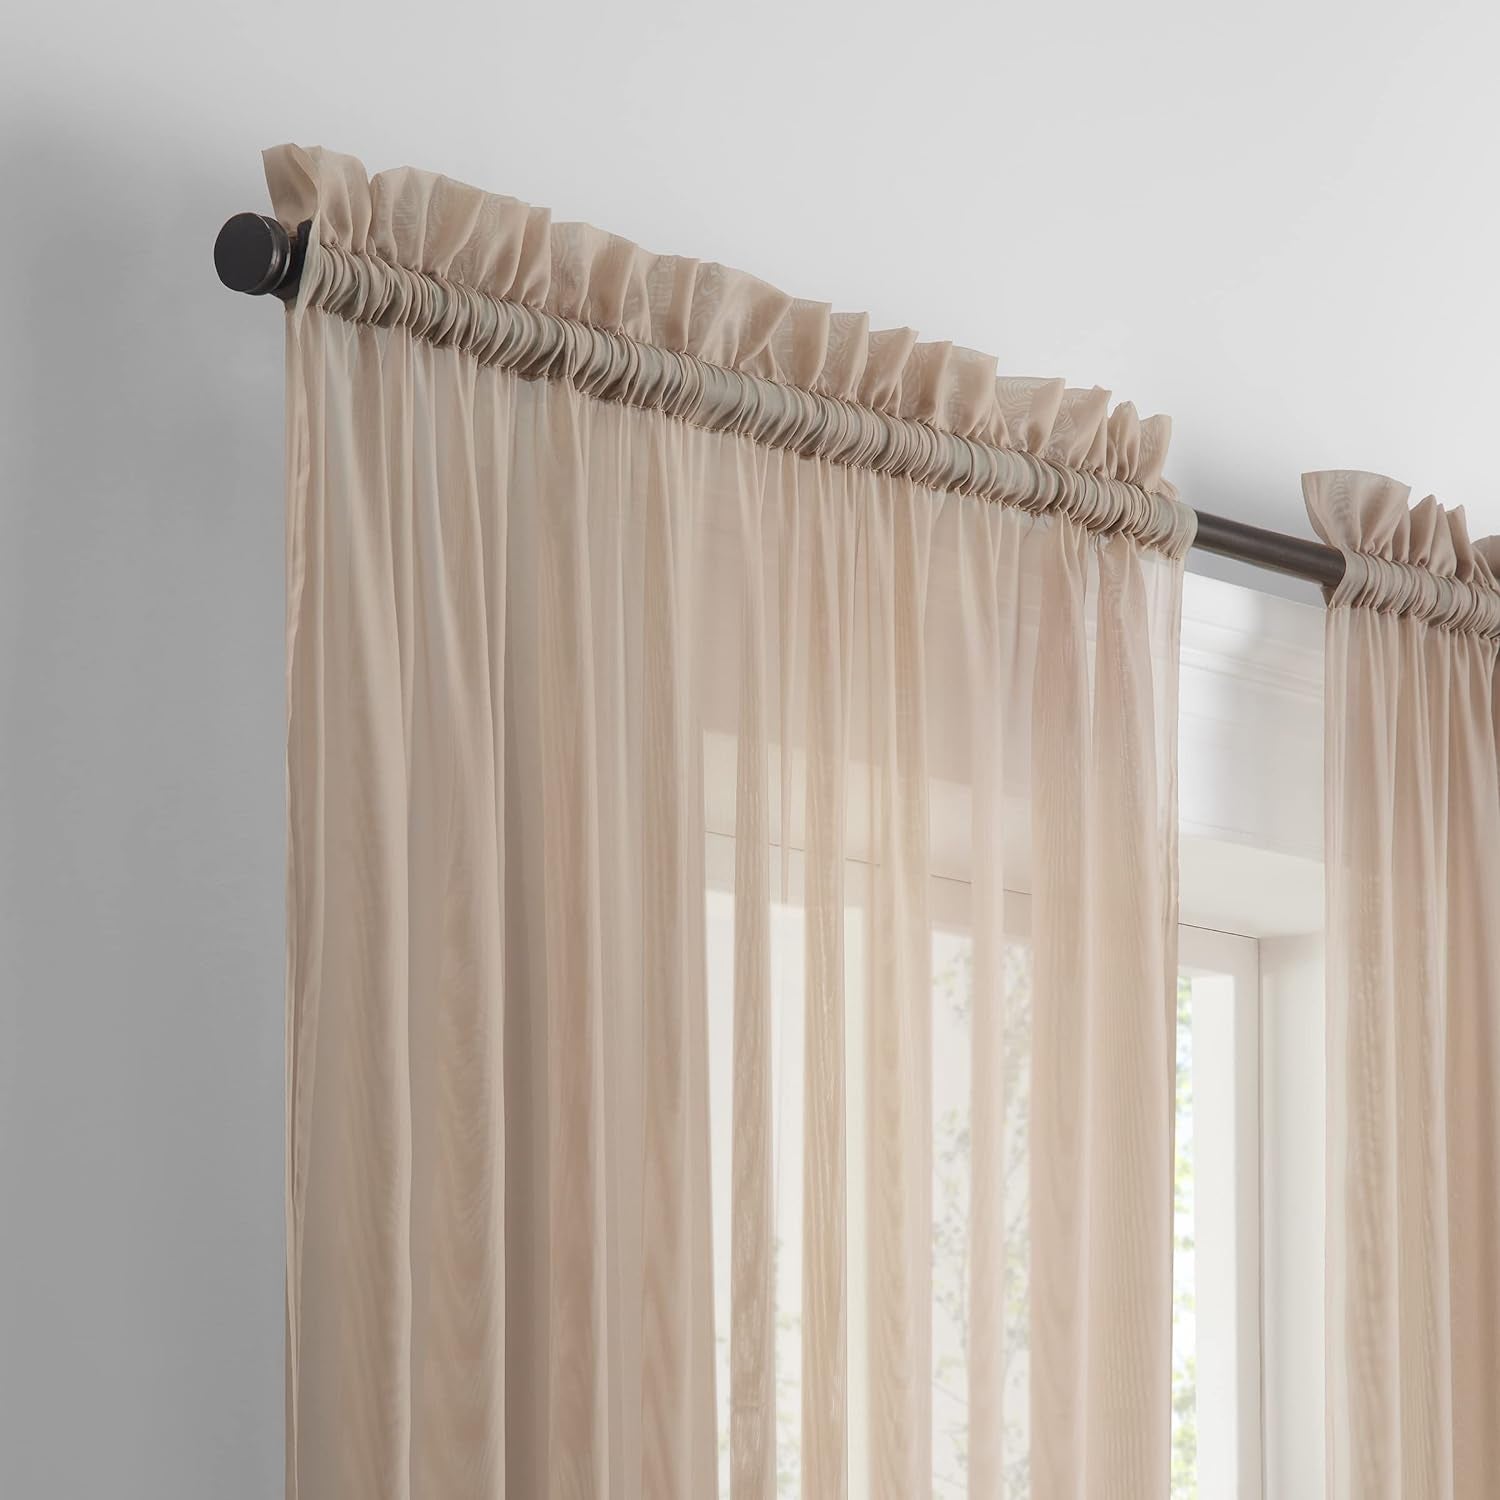 Pairs to Go Victoria Voile Modern Sheer Rod Pocket Window Curtains for Living Room (2 Panels), 59 in X 84 In, Taupe  Ellery Homestyles   